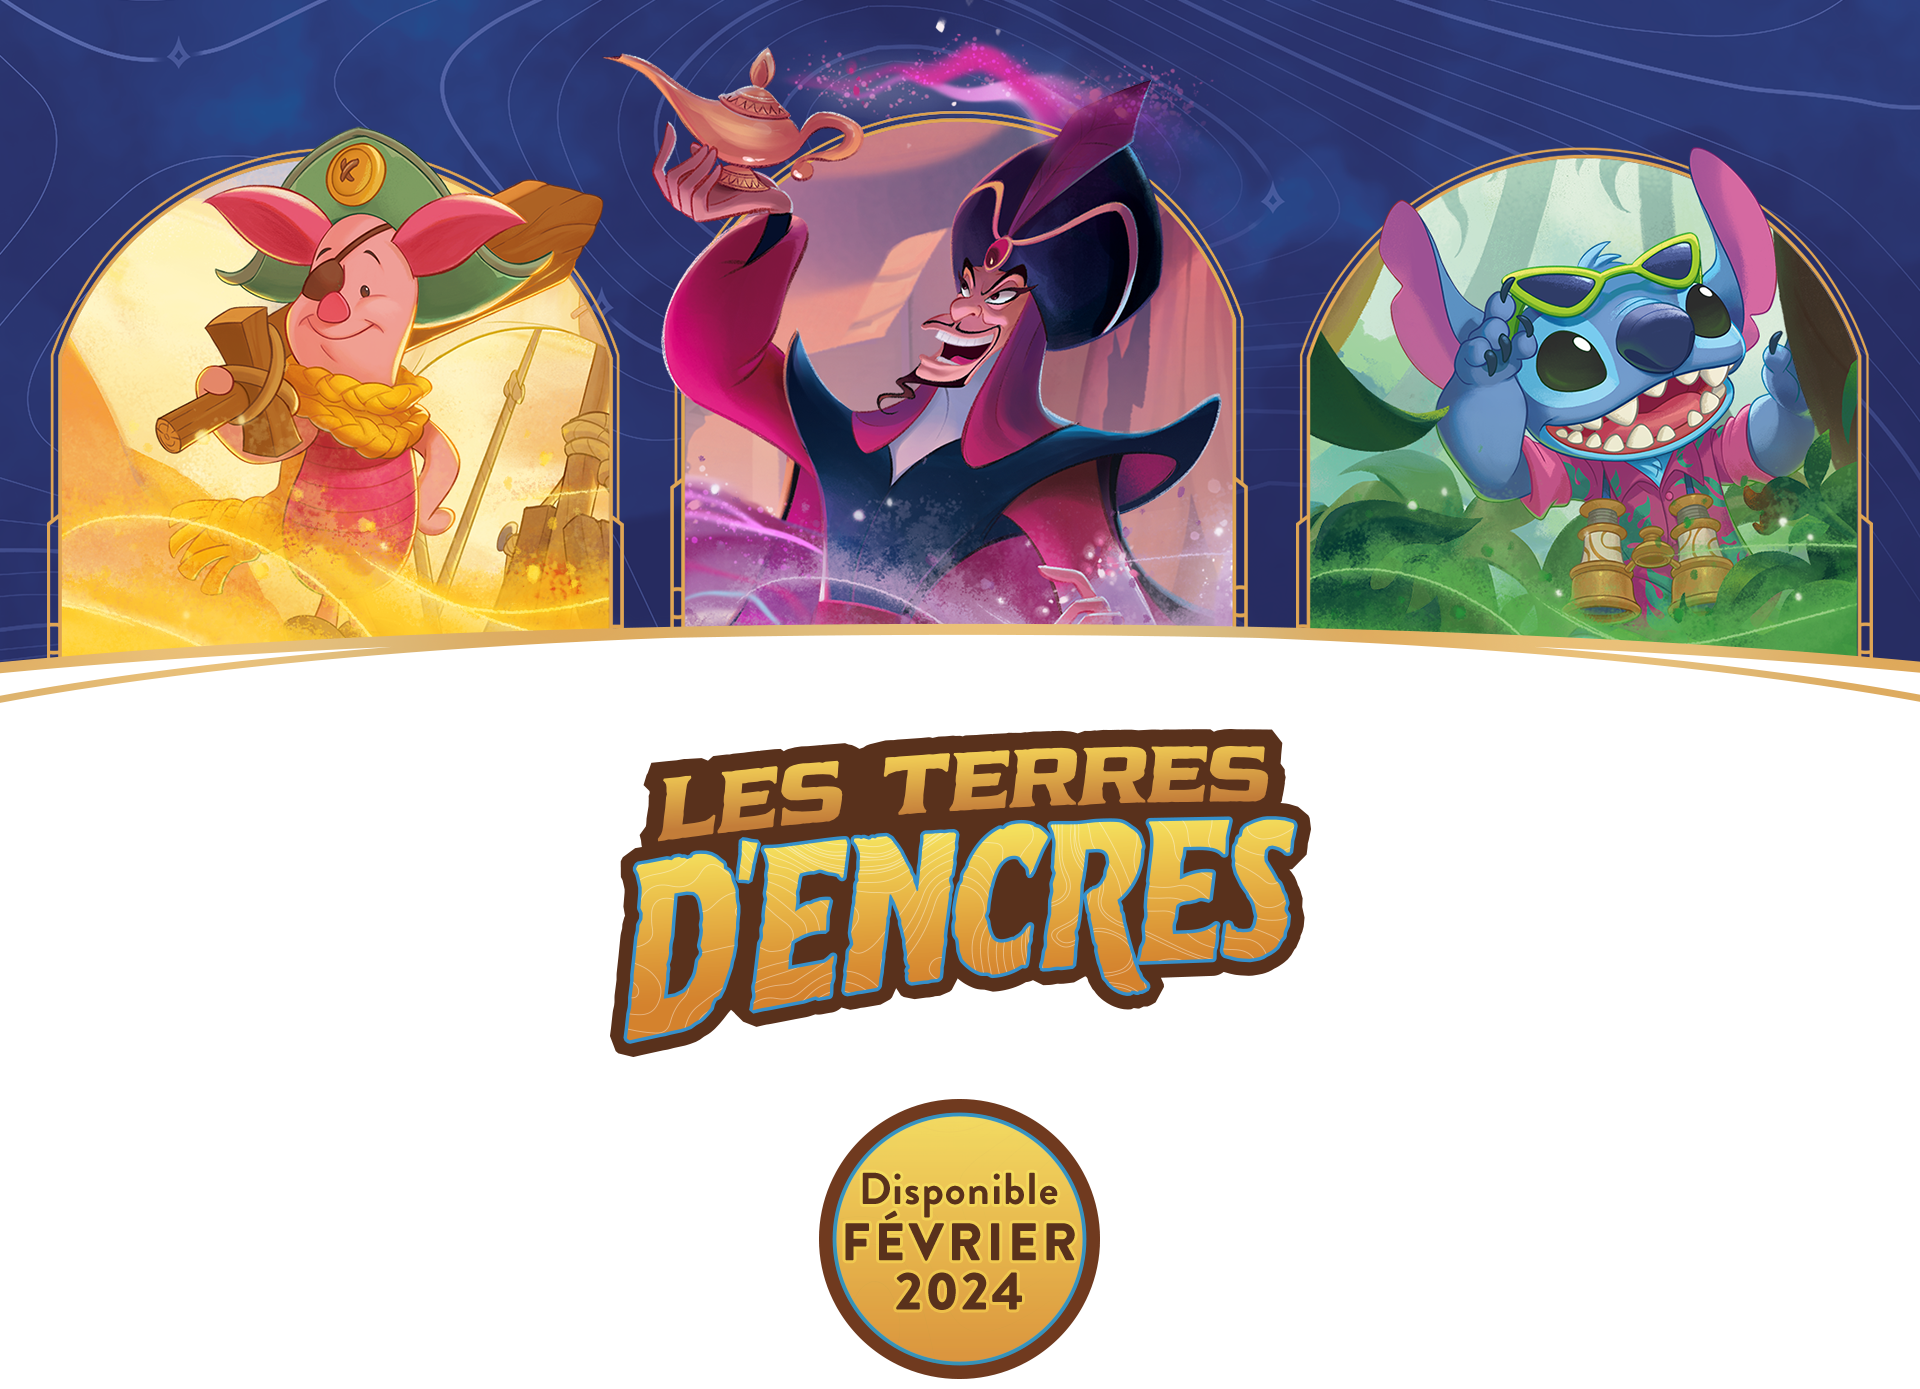 Decorative header image showing three characters (left to right: Piglet, Jafar, Stitch) and a logo that says Les Terres D'Encres. Available February 2024